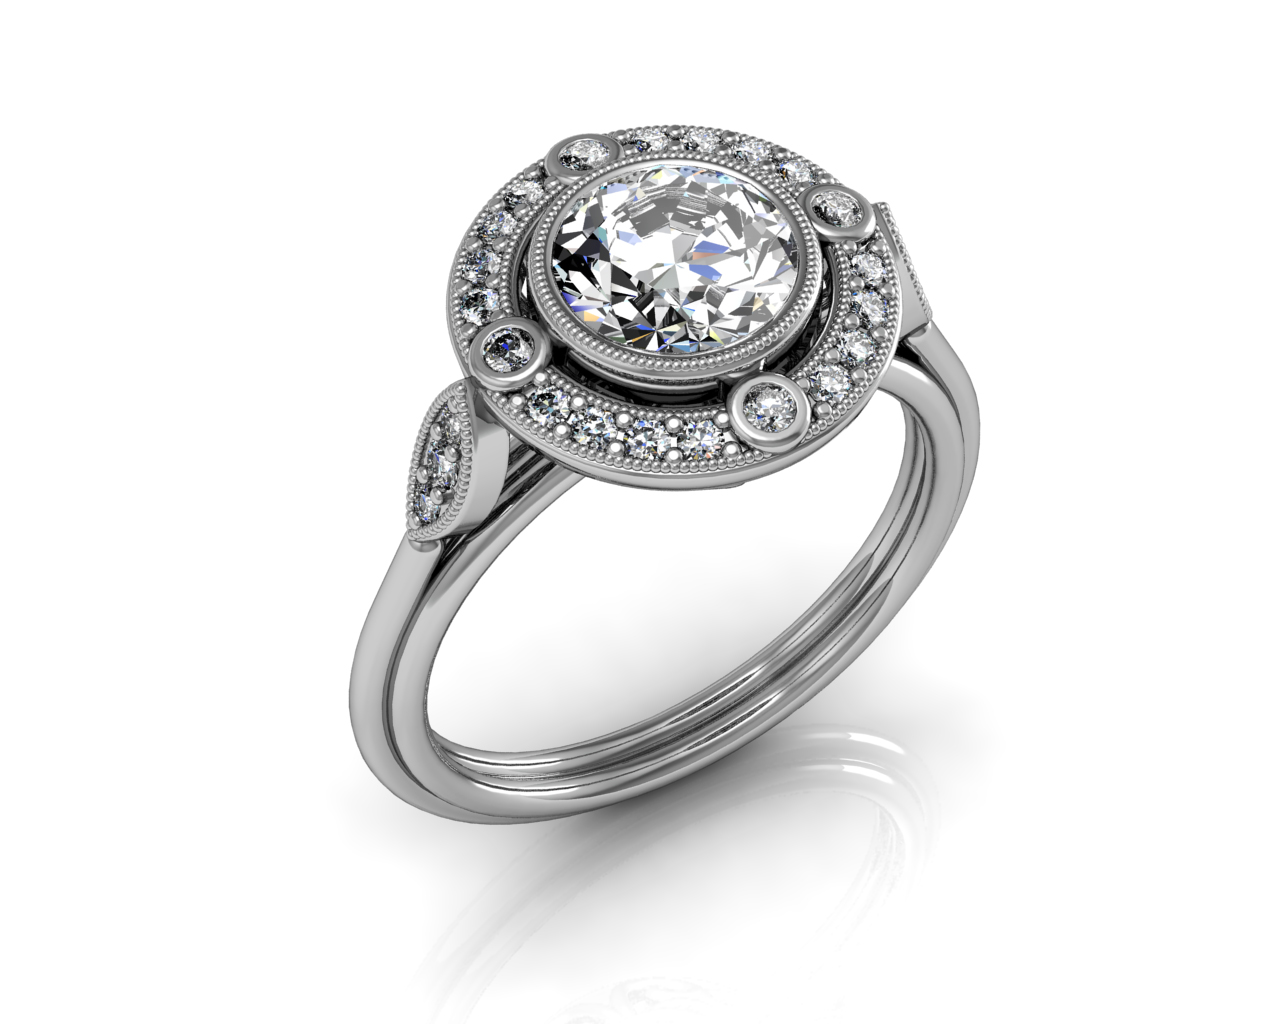 SOUTH-BAY-GOLD 3ct Round Cut Diamond Halo on White Gold - Engagement Ring